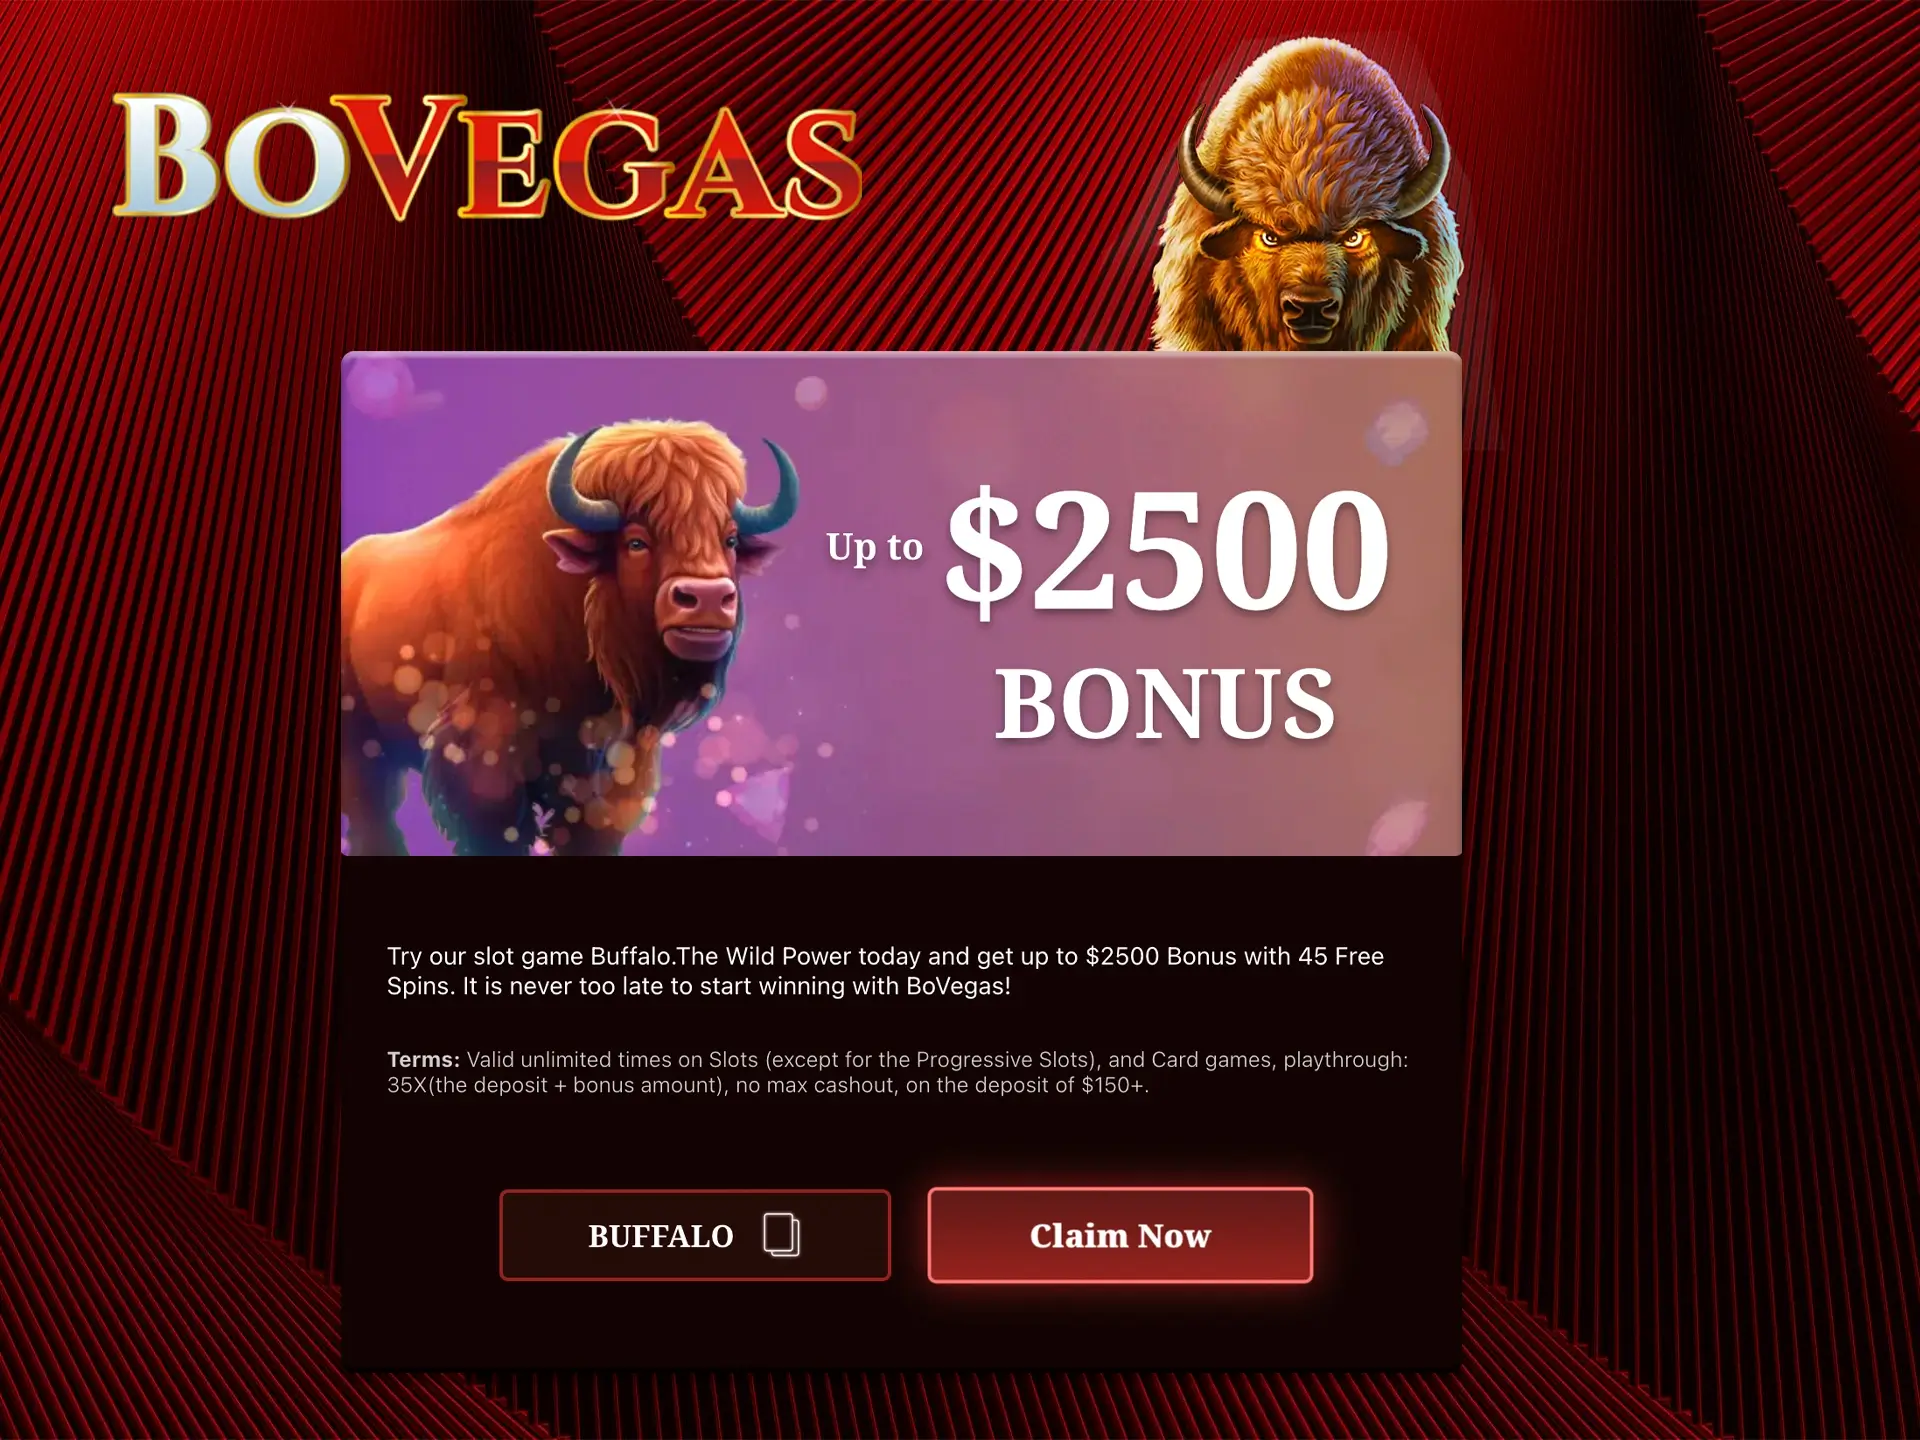 The Buffalo game is very popular among slot players, don't miss the opportunity to win at BoVegas using their promo code.